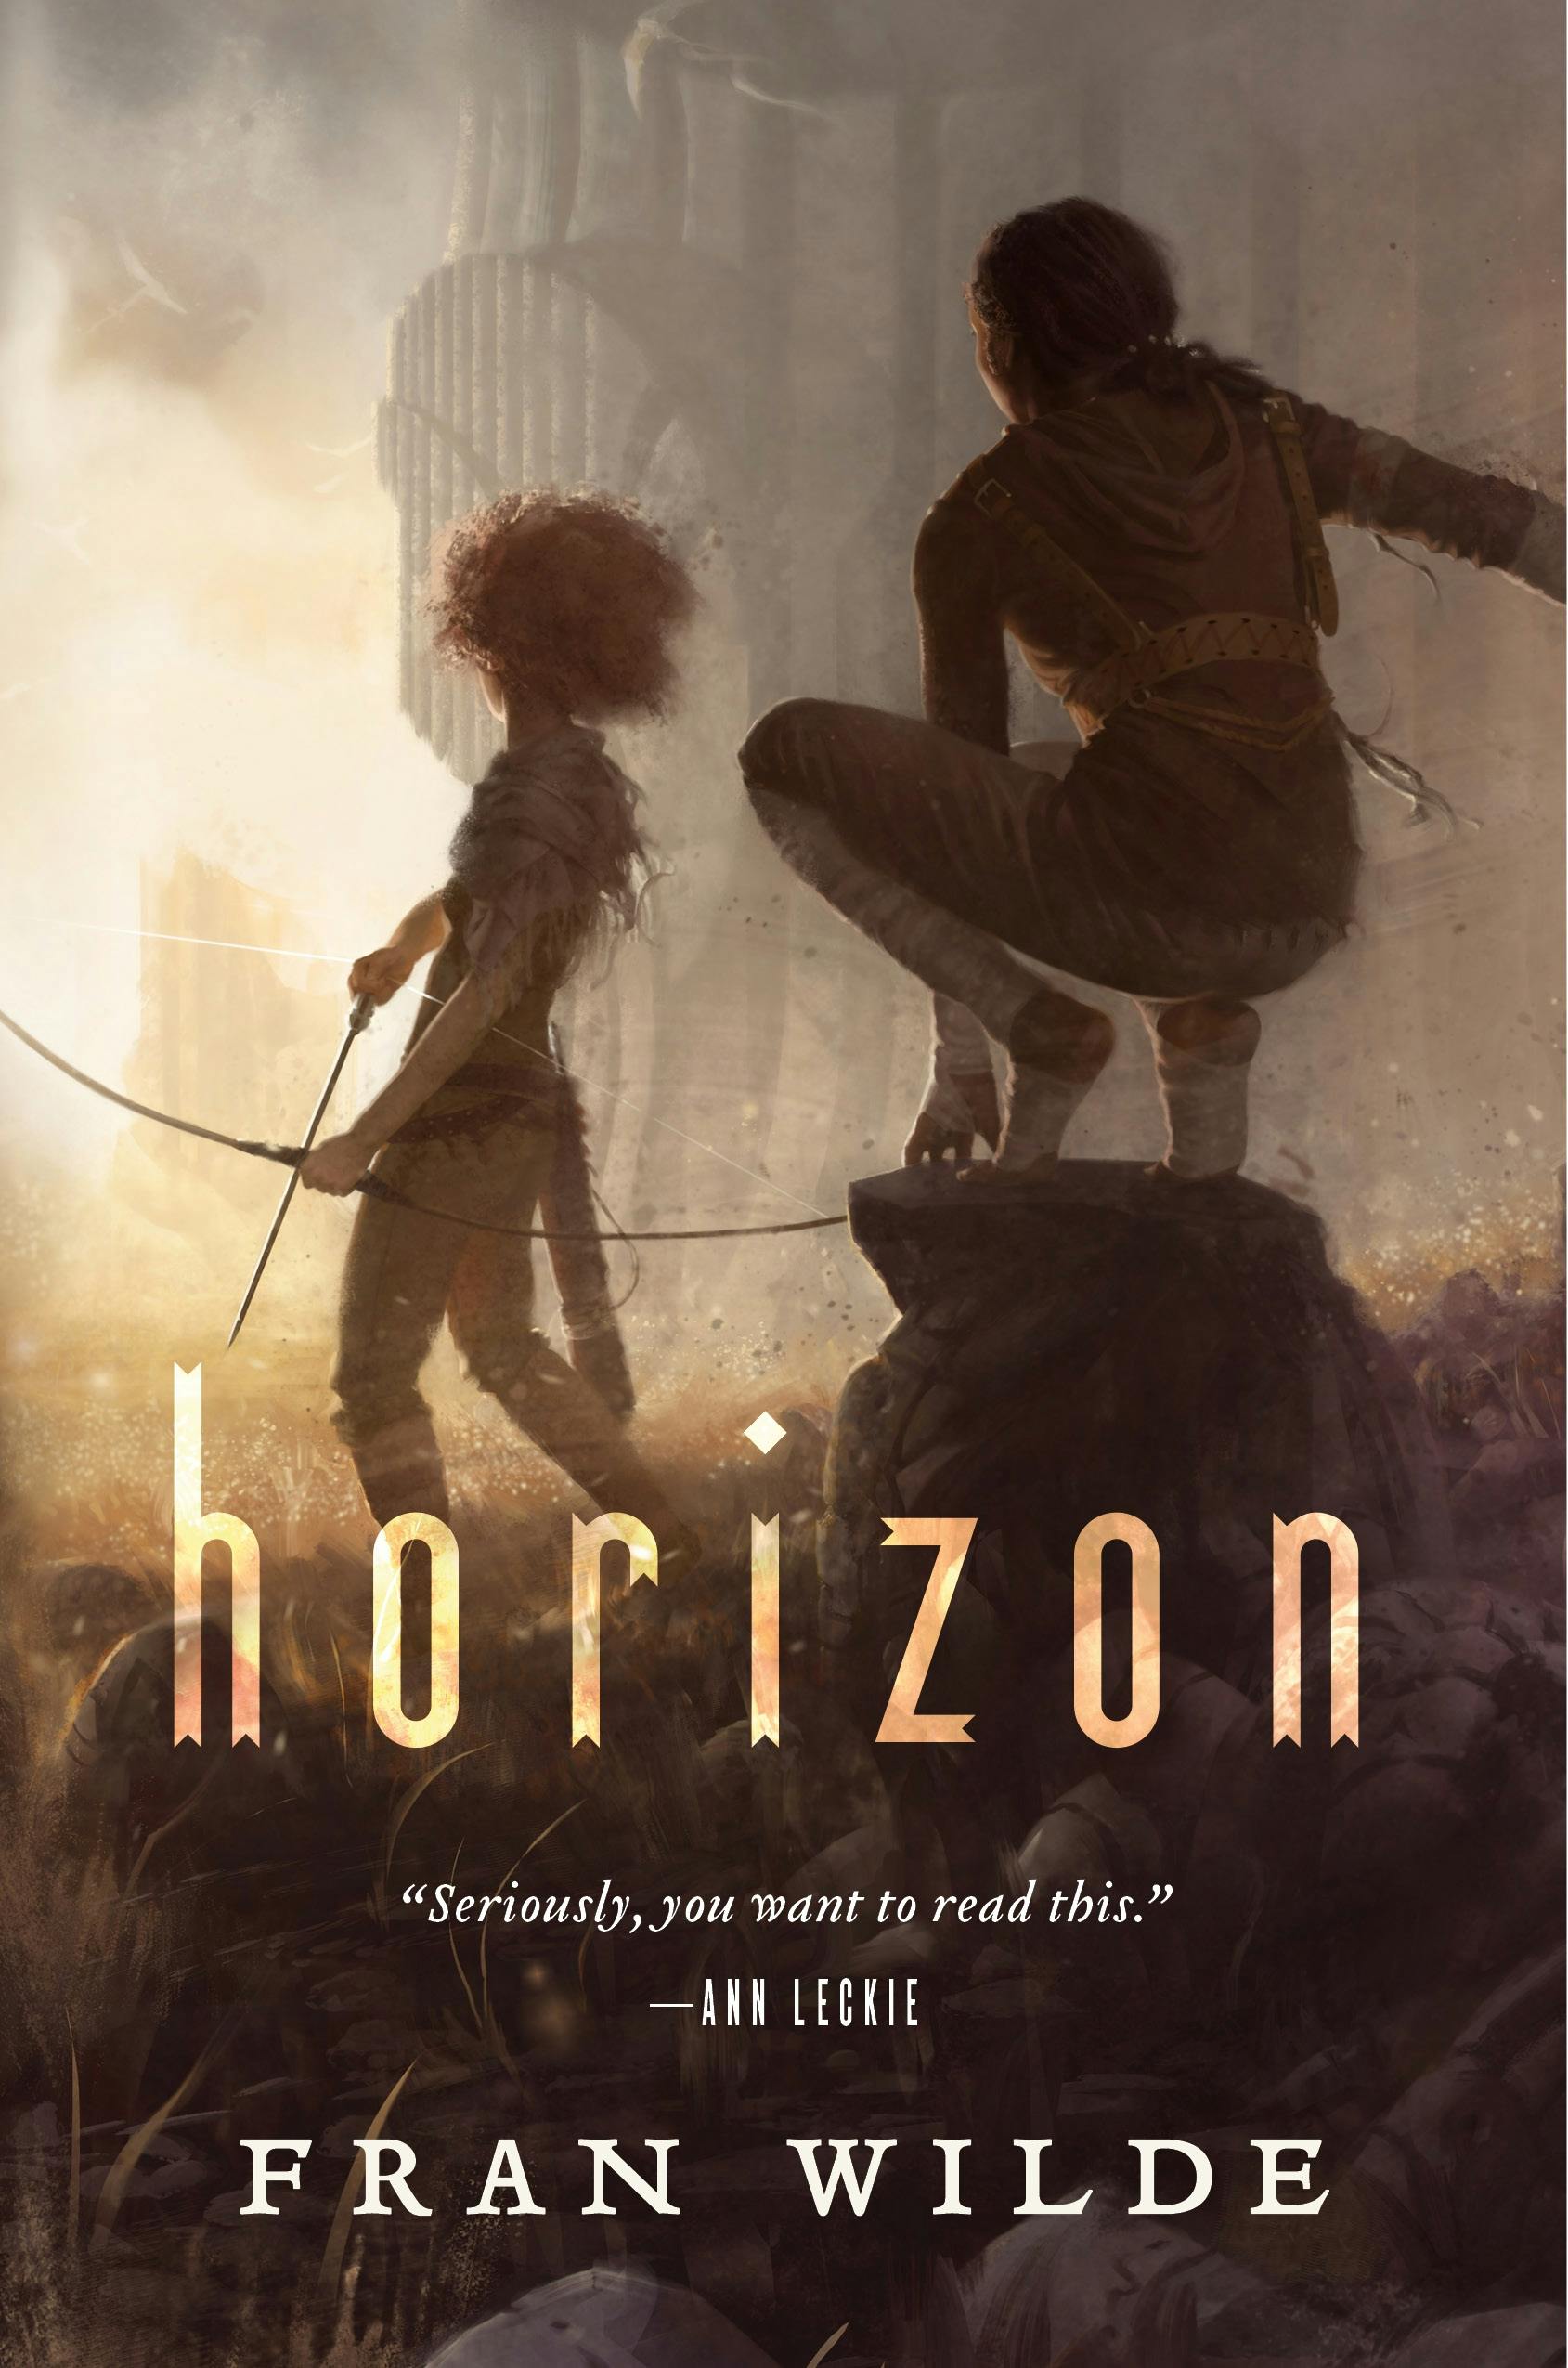 Cover for the book titled as: Horizon